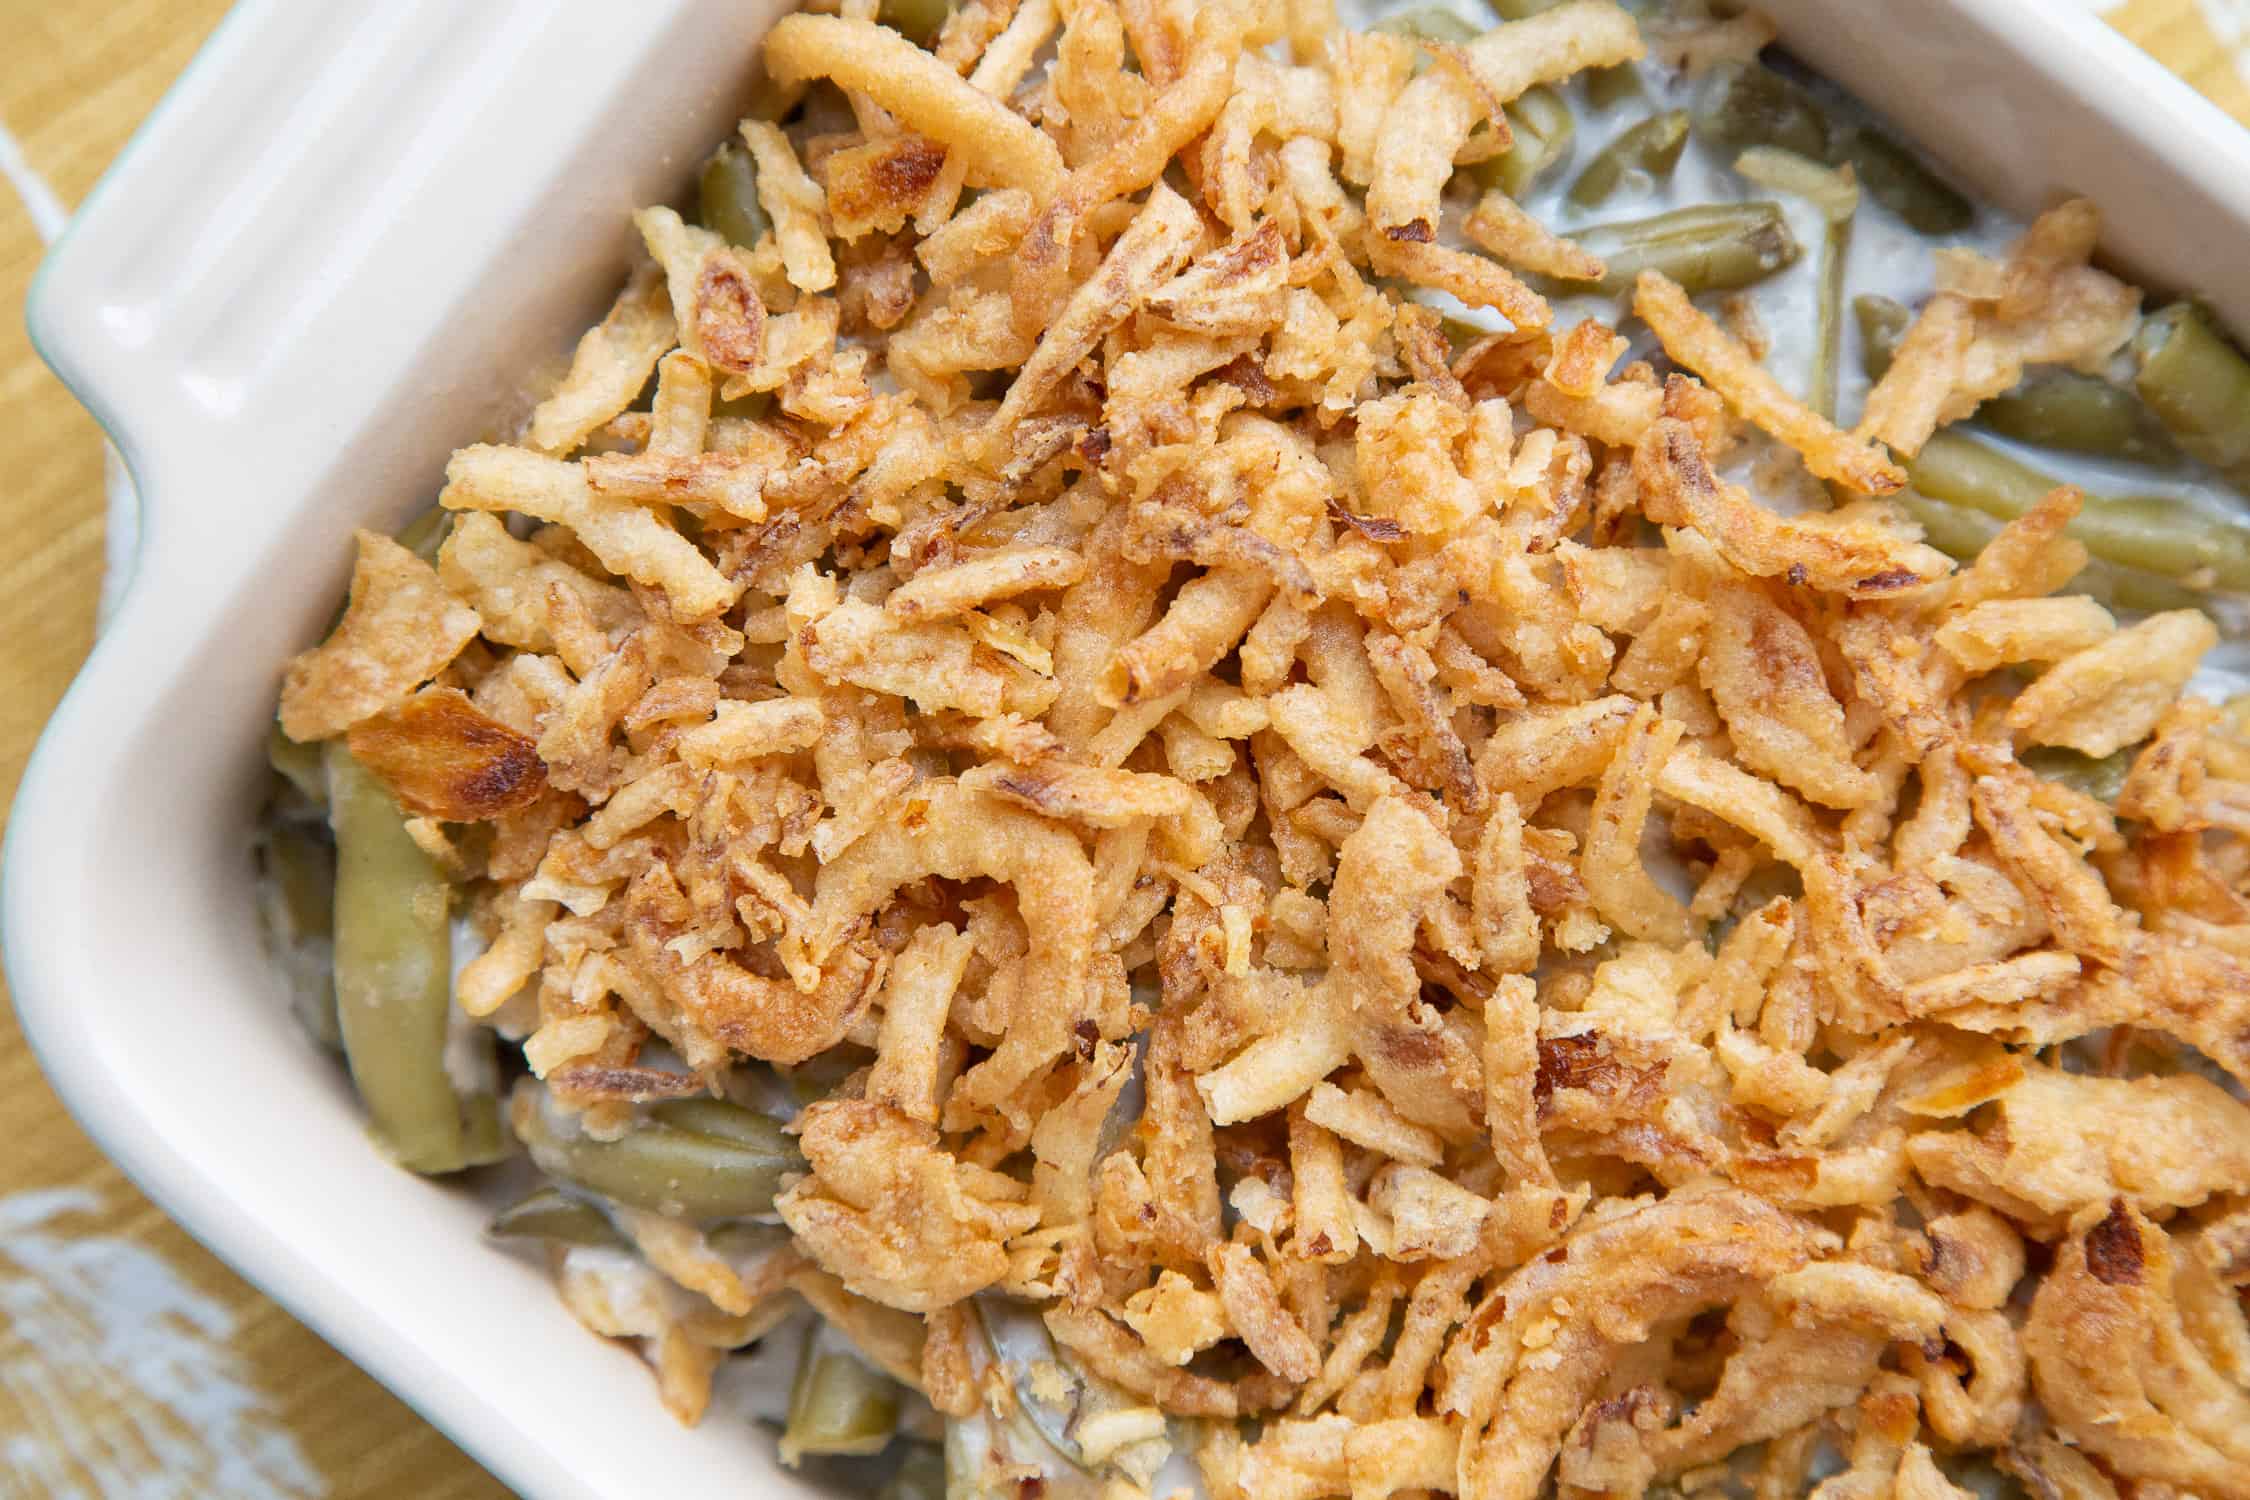 green bean casserole topped with fried onions in a casserole dish.